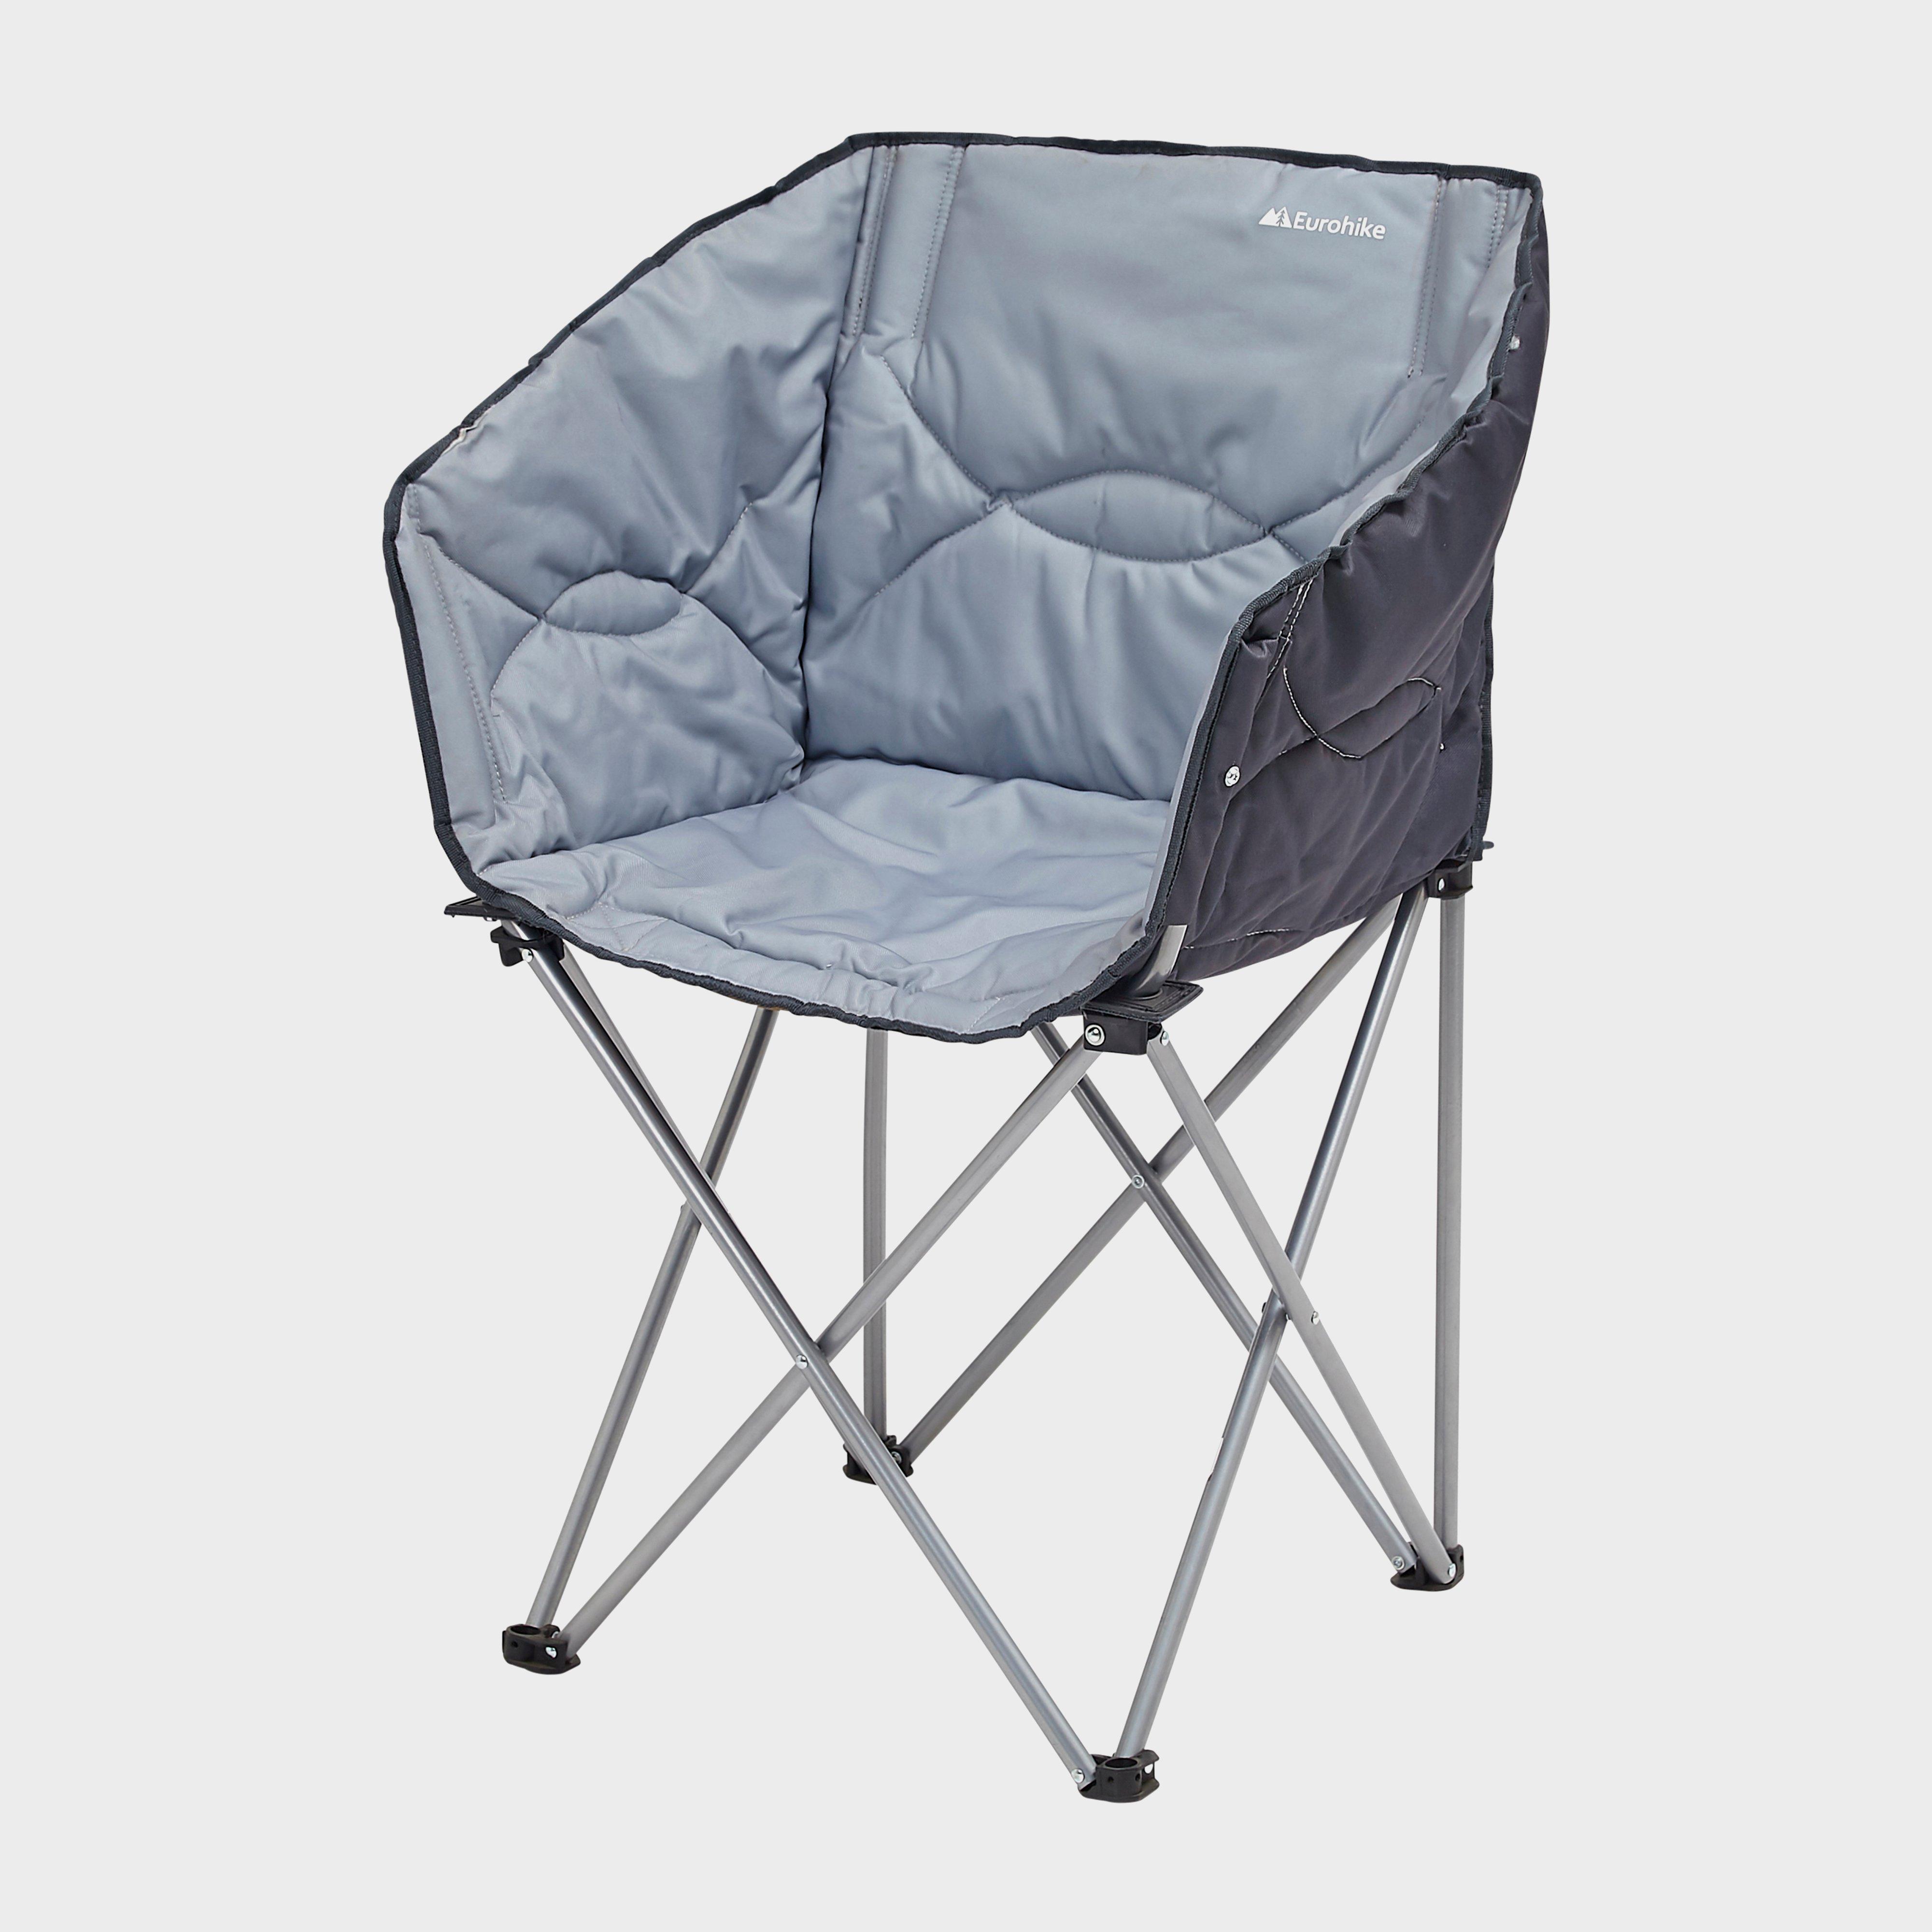 Image of Eurohike Quilted Tub Chair - Blue/Dgy, blue/DGY